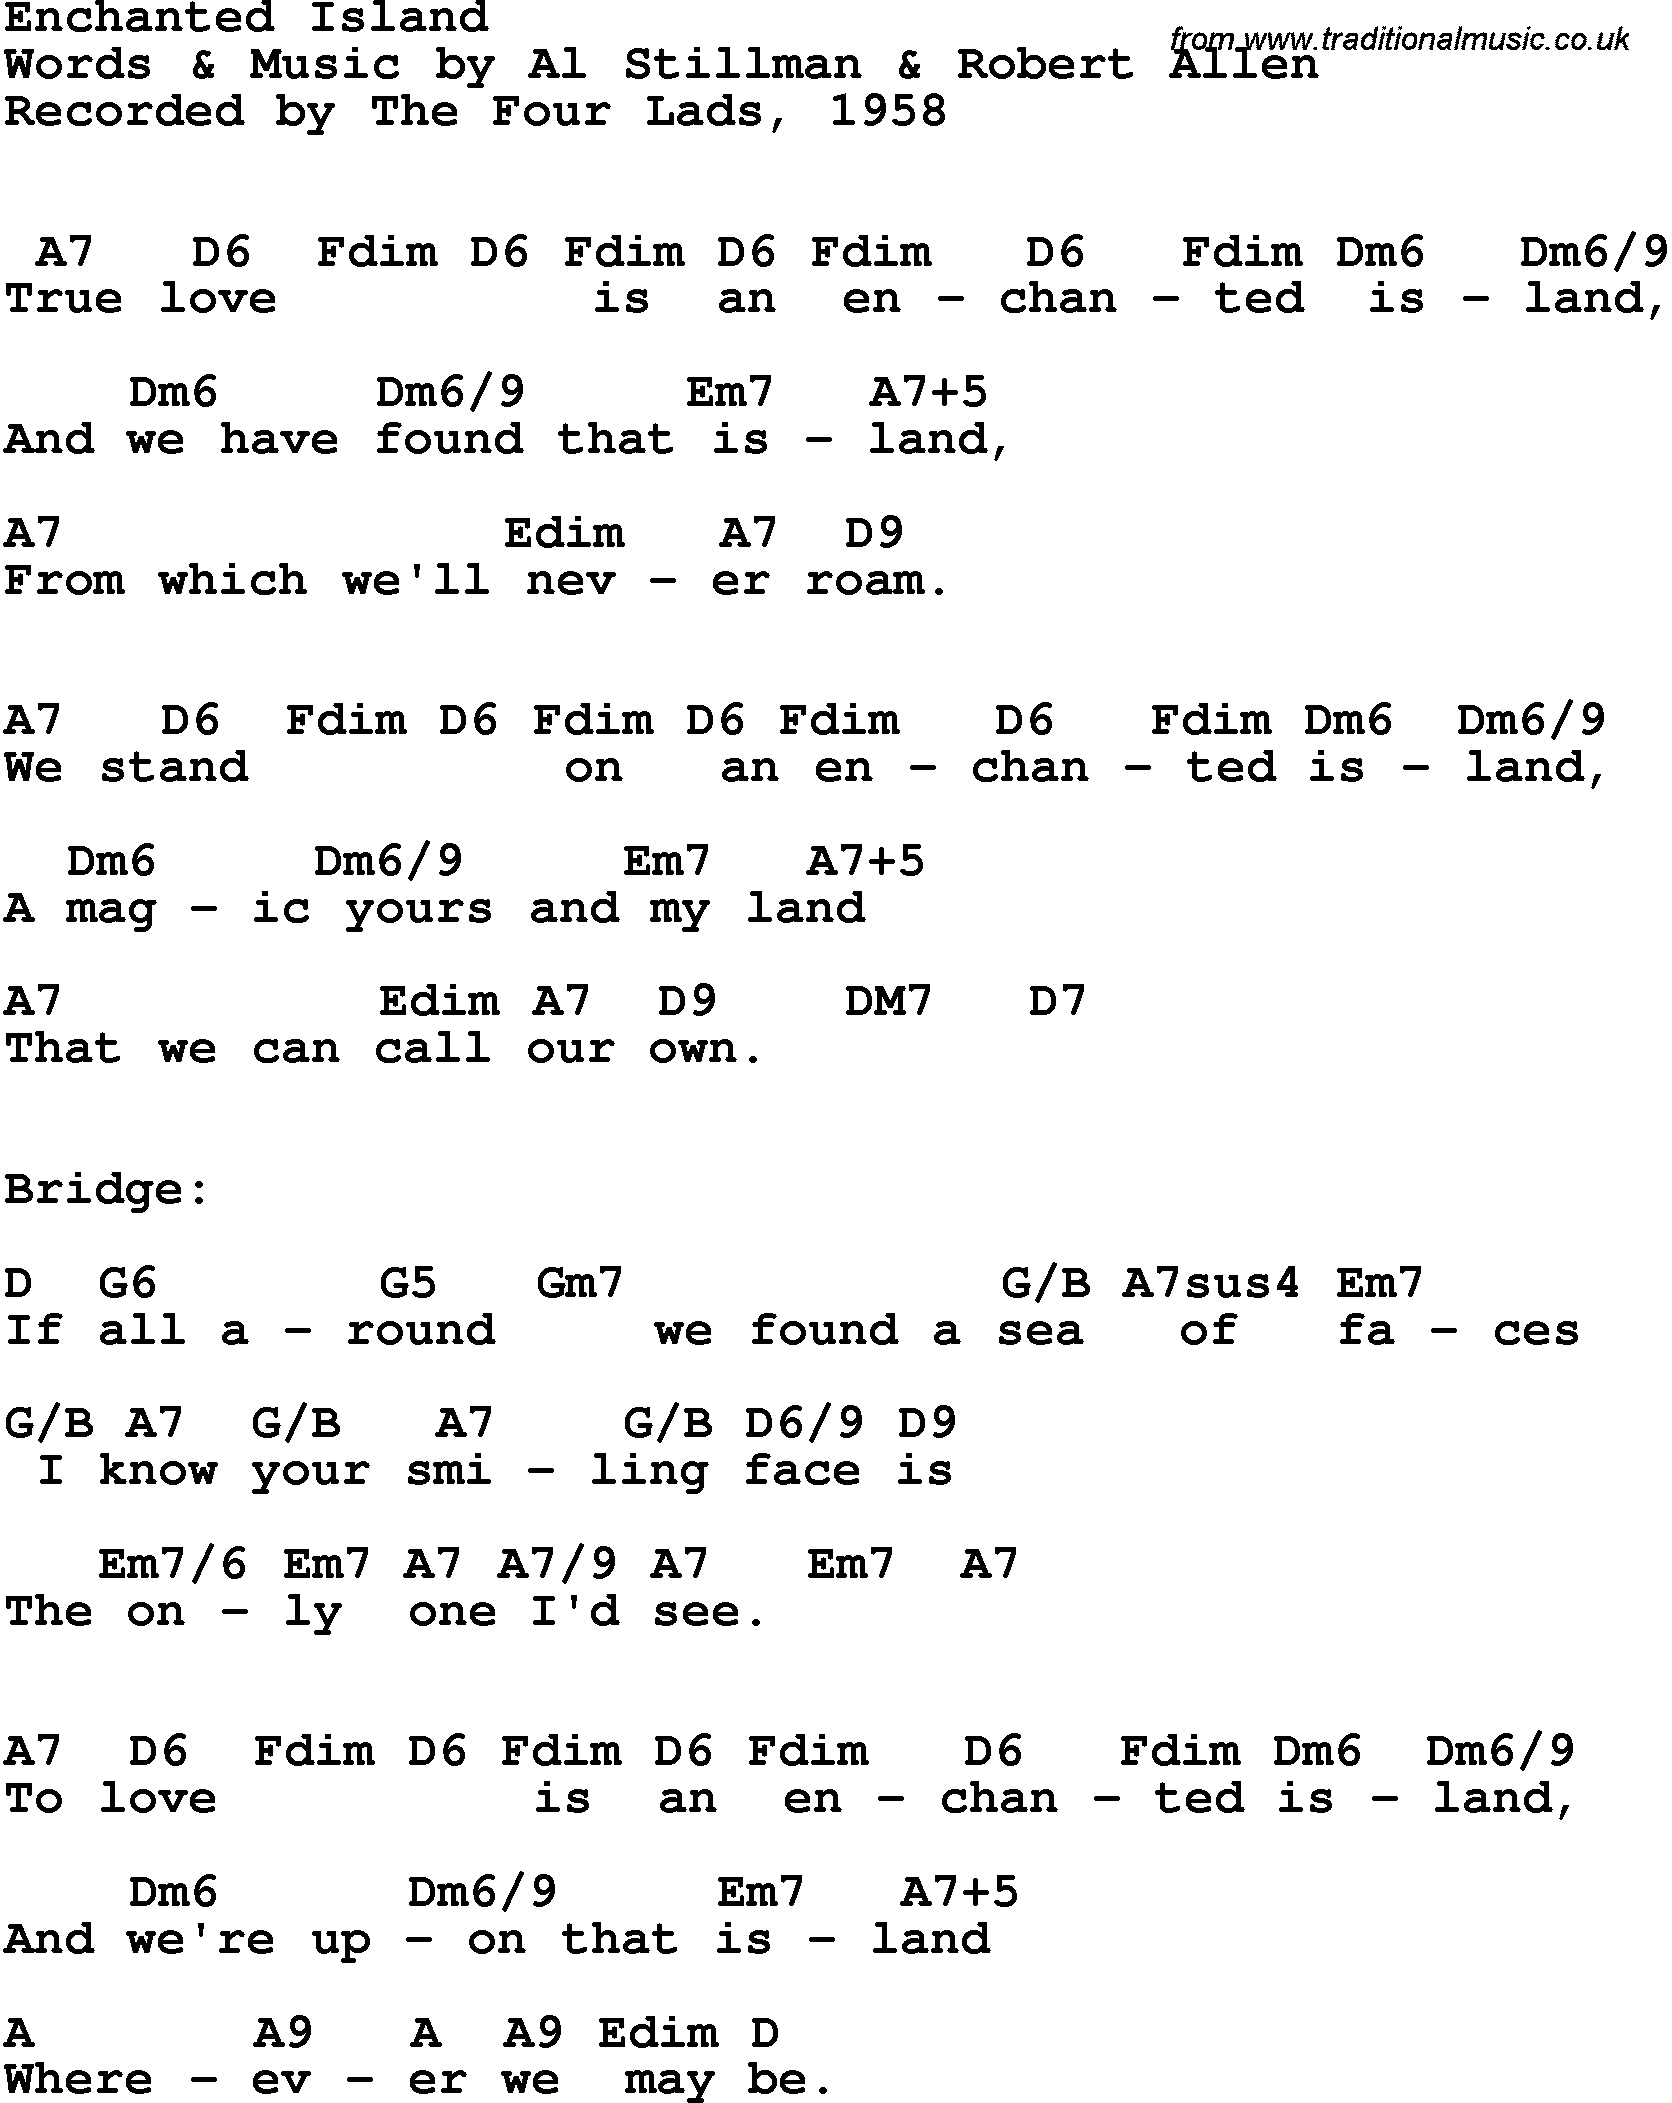 Song Lyrics with guitar chords for Enchanted Island - The Four Lads, 1958